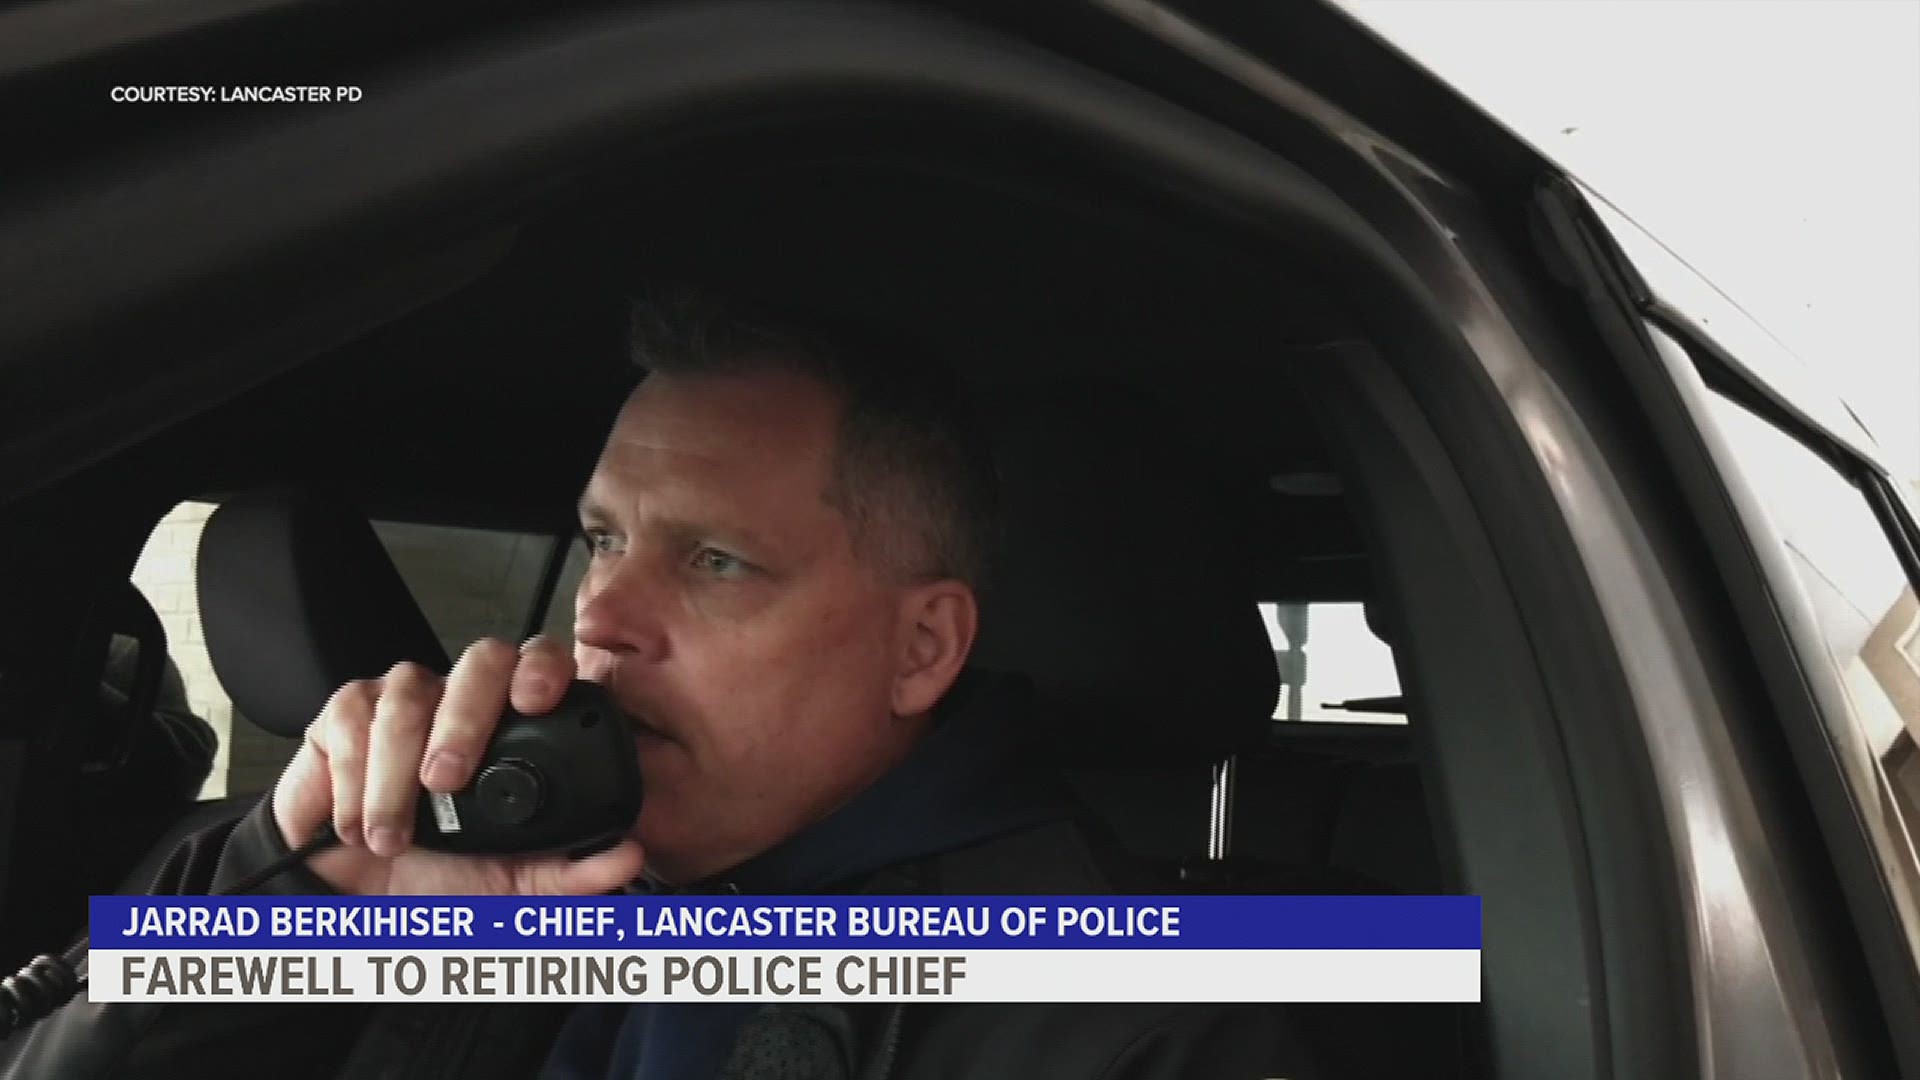 Chief Jarrad Berkihiser retired Thursday after 26 years of service to the city. His retirement comes amid controversy.